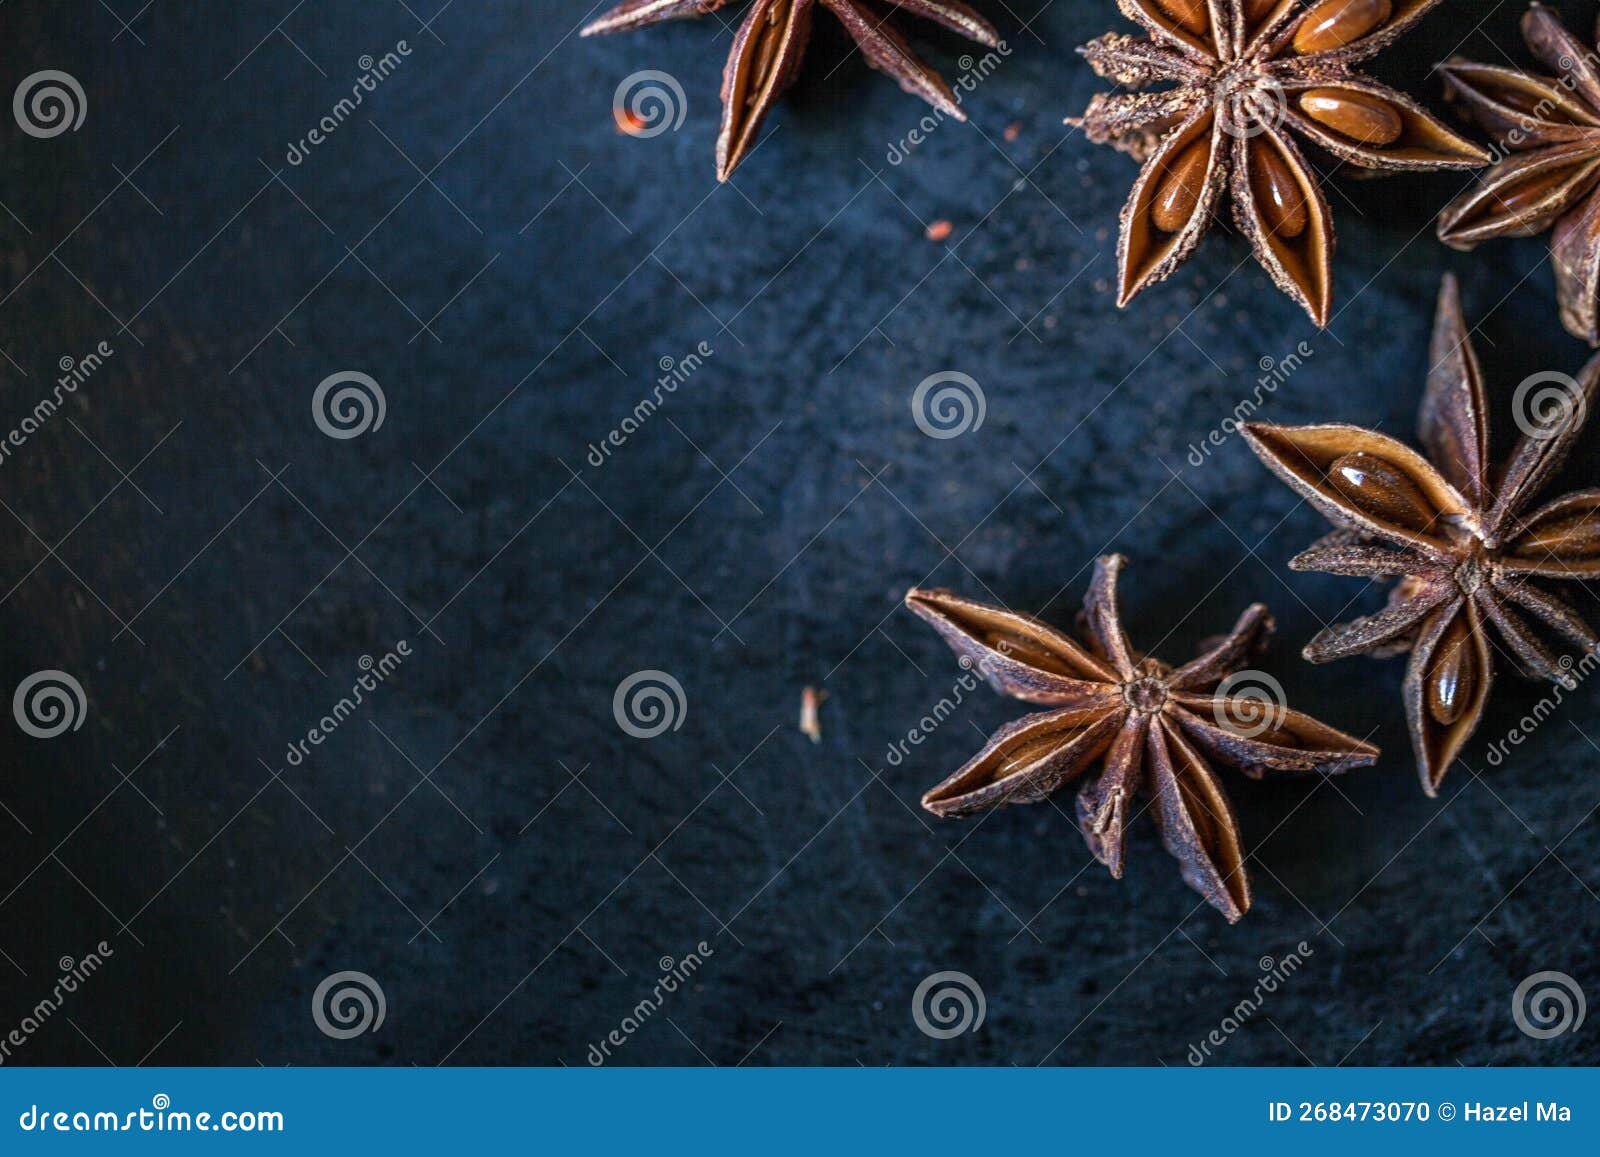 There are Some Fresh Anise Seasonings on the Table Stock Photo - Image ...